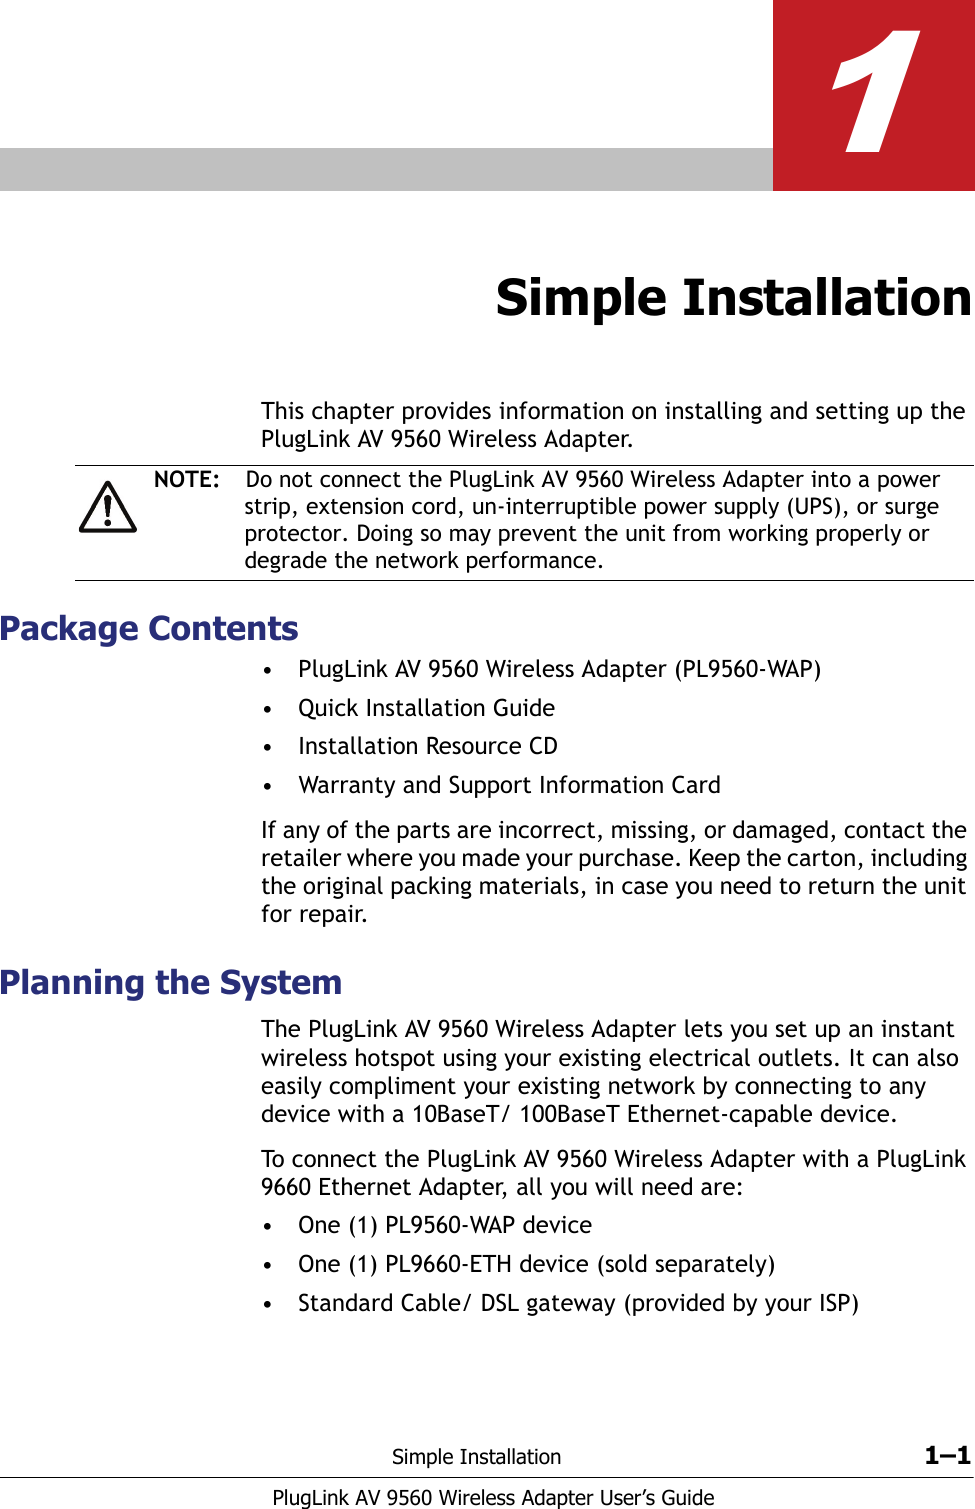 Simple Installation 1–1PlugLink AV 9560 Wireless Adapter User’s Guide1Simple InstallationThis chapter provides information on installing and setting up the PlugLink AV 9560 Wireless Adapter. Package Contents• PlugLink AV 9560 Wireless Adapter (PL9560-WAP)• Quick Installation Guide• Installation Resource CD• Warranty and Support Information CardIf any of the parts are incorrect, missing, or damaged, contact the retailer where you made your purchase. Keep the carton, including the original packing materials, in case you need to return the unit for repair. Planning the SystemThe PlugLink AV 9560 Wireless Adapter lets you set up an instant wireless hotspot using your existing electrical outlets. It can also easily compliment your existing network by connecting to any device with a 10BaseT/ 100BaseT Ethernet-capable device.To connect the PlugLink AV 9560 Wireless Adapter with a PlugLink 9660 Ethernet Adapter, all you will need are:• One (1) PL9560-WAP device• One (1) PL9660-ETH device (sold separately) • Standard Cable/ DSL gateway (provided by your ISP)NOTE: Do not connect the PlugLink AV 9560 Wireless Adapter into a power strip, extension cord, un-interruptible power supply (UPS), or surge protector. Doing so may prevent the unit from working properly or degrade the network performance.